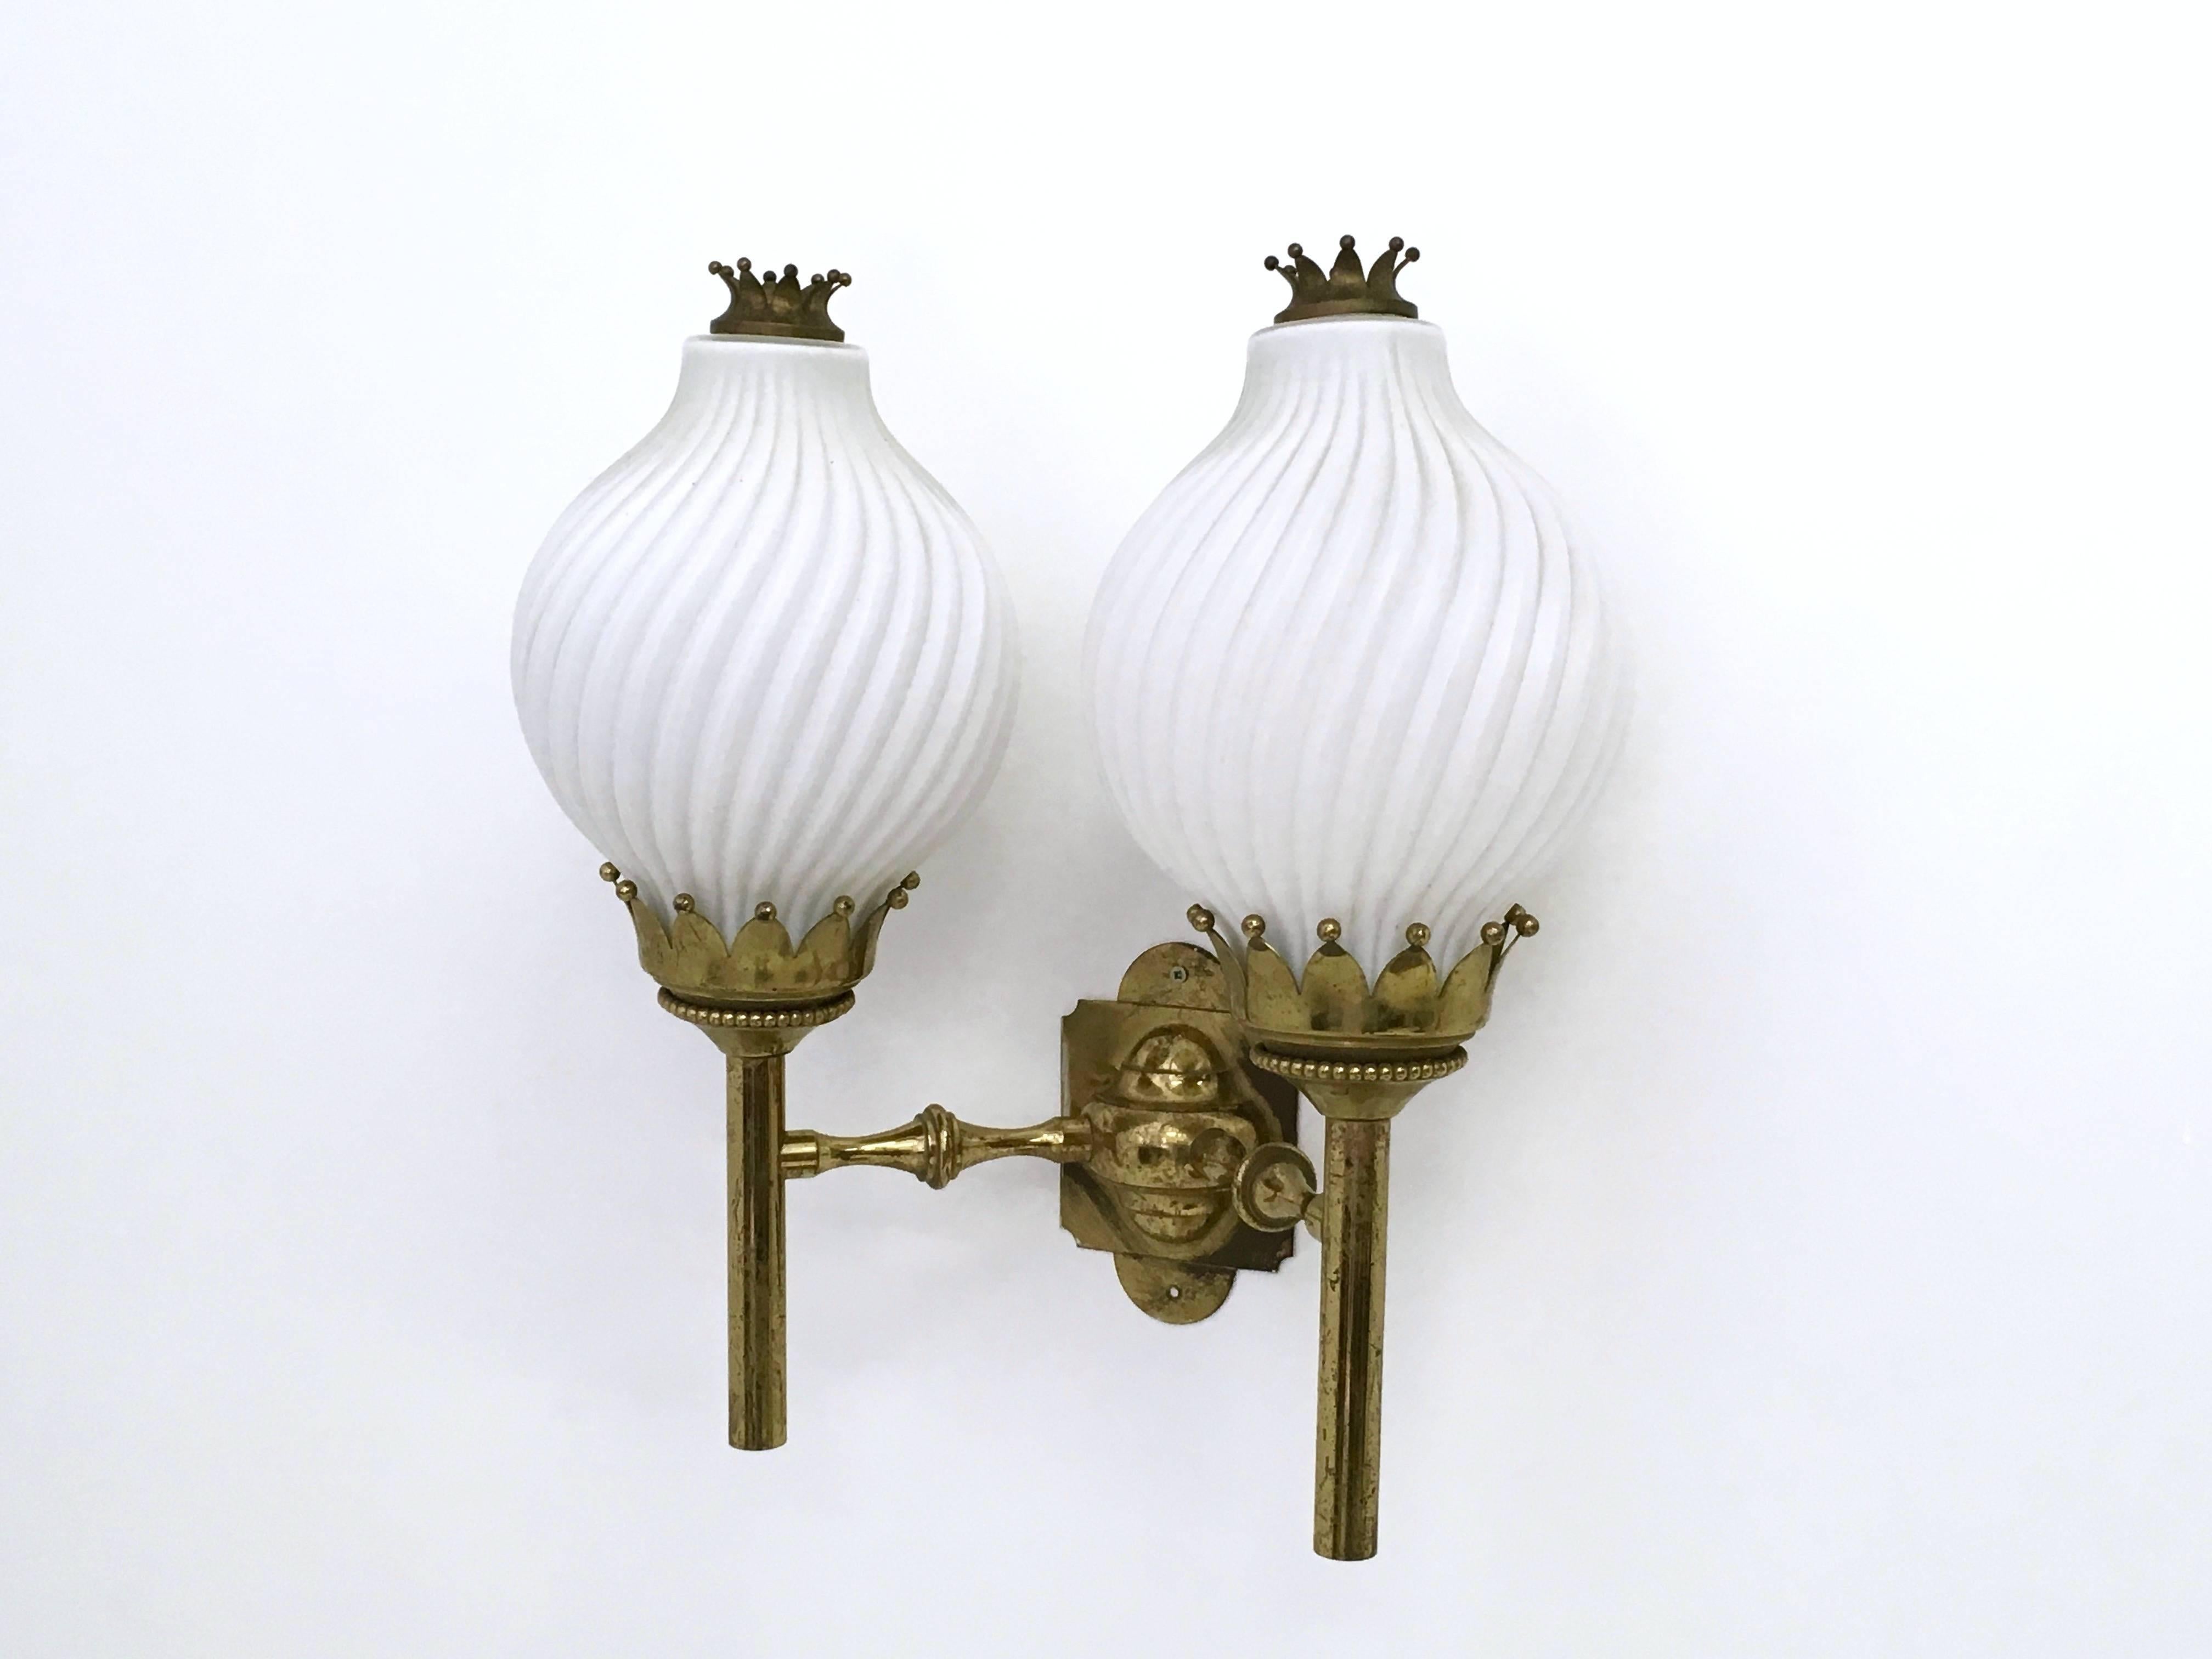 Made in Italy, 1950s.
This sconce is made in brass and opaline glass. 
It may show slight traces of use since it's vintage, but it can be considered as in very good original condition and ready to give ambiance to any room.
It features its original